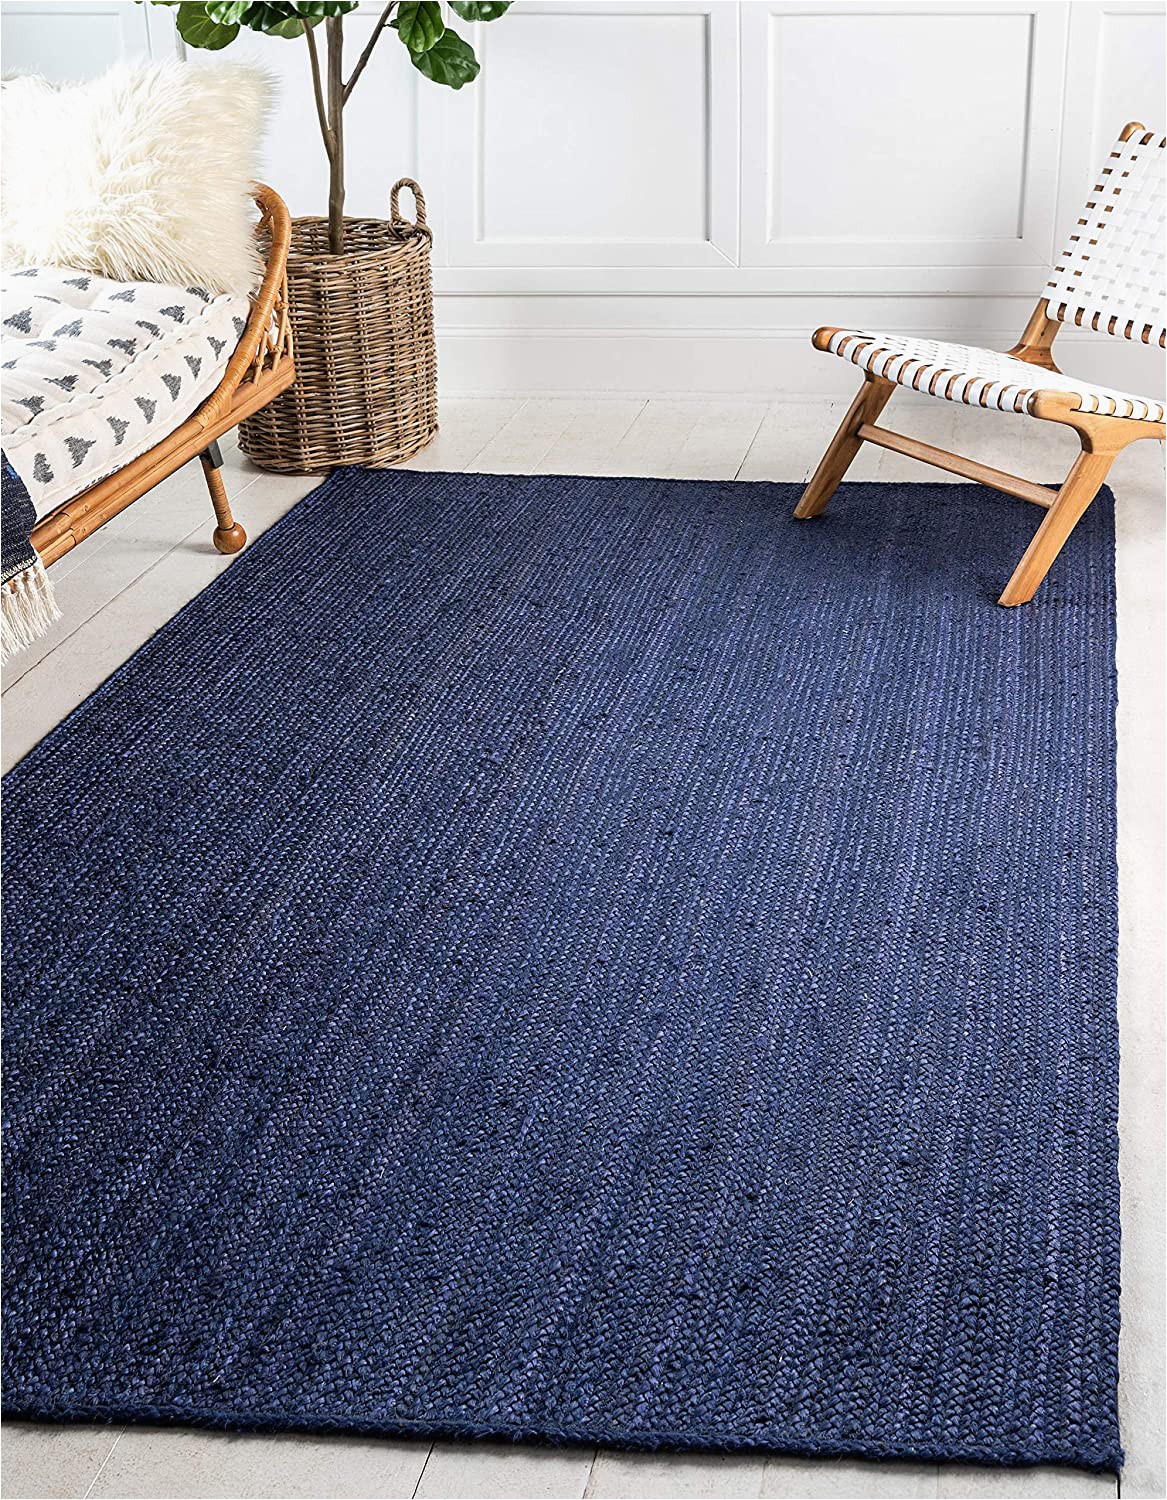 Dark Navy Blue area Rug Unique Loom Braided Jute Collection Hand Woven Natural Fibers Navy Blue Dark Blue area Rug 9 0 X 12 0